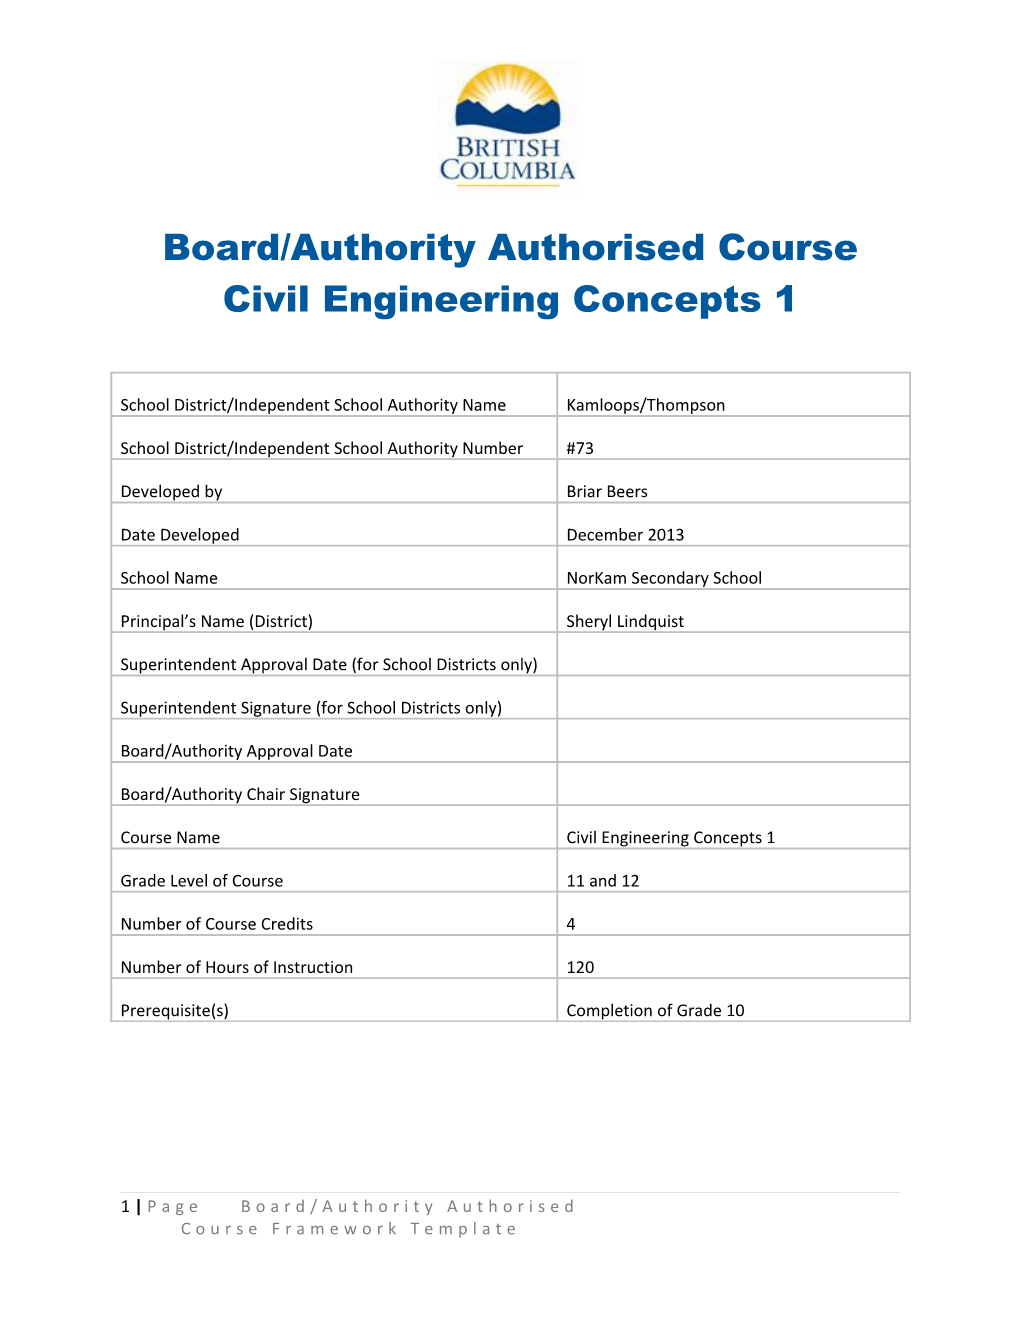 Board/Authority Authorised Course Framework Template